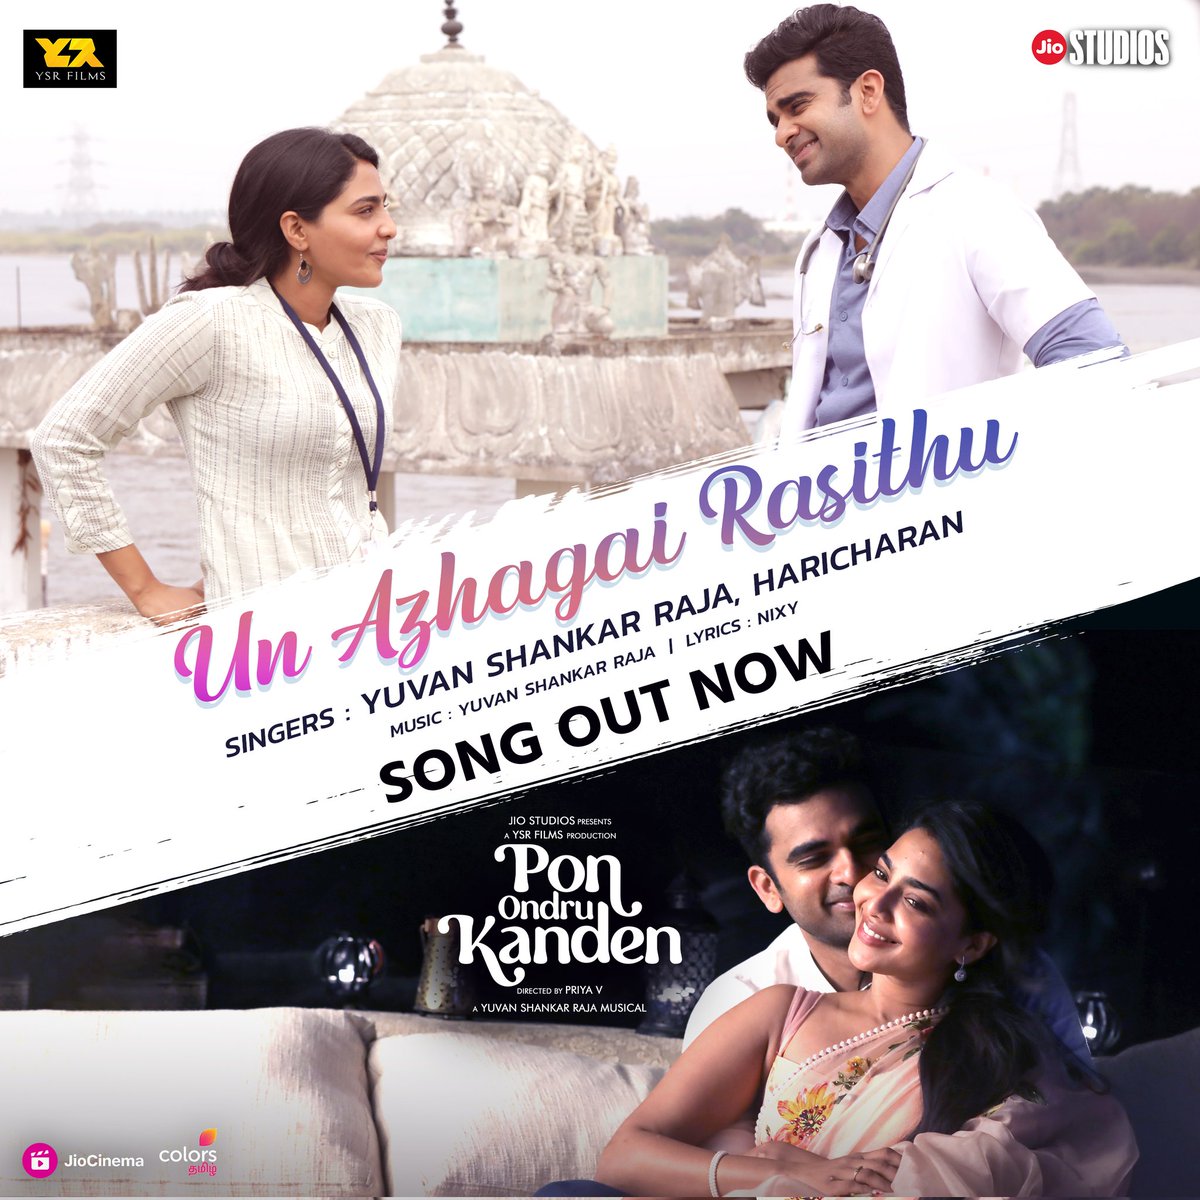 A glimpse of the past, a touch of the present, and a whisper of what could be. 'Un Azhagai Rasithu Paakka' unveils a love story unlike any other. Song out now! youtube.com/watch?v=nwP3Gz… @AshokSelvan @AishuL_ @iamvasanthravi #JyotiDeshpande @thisisysr @directorpriya_v @bagath_at…